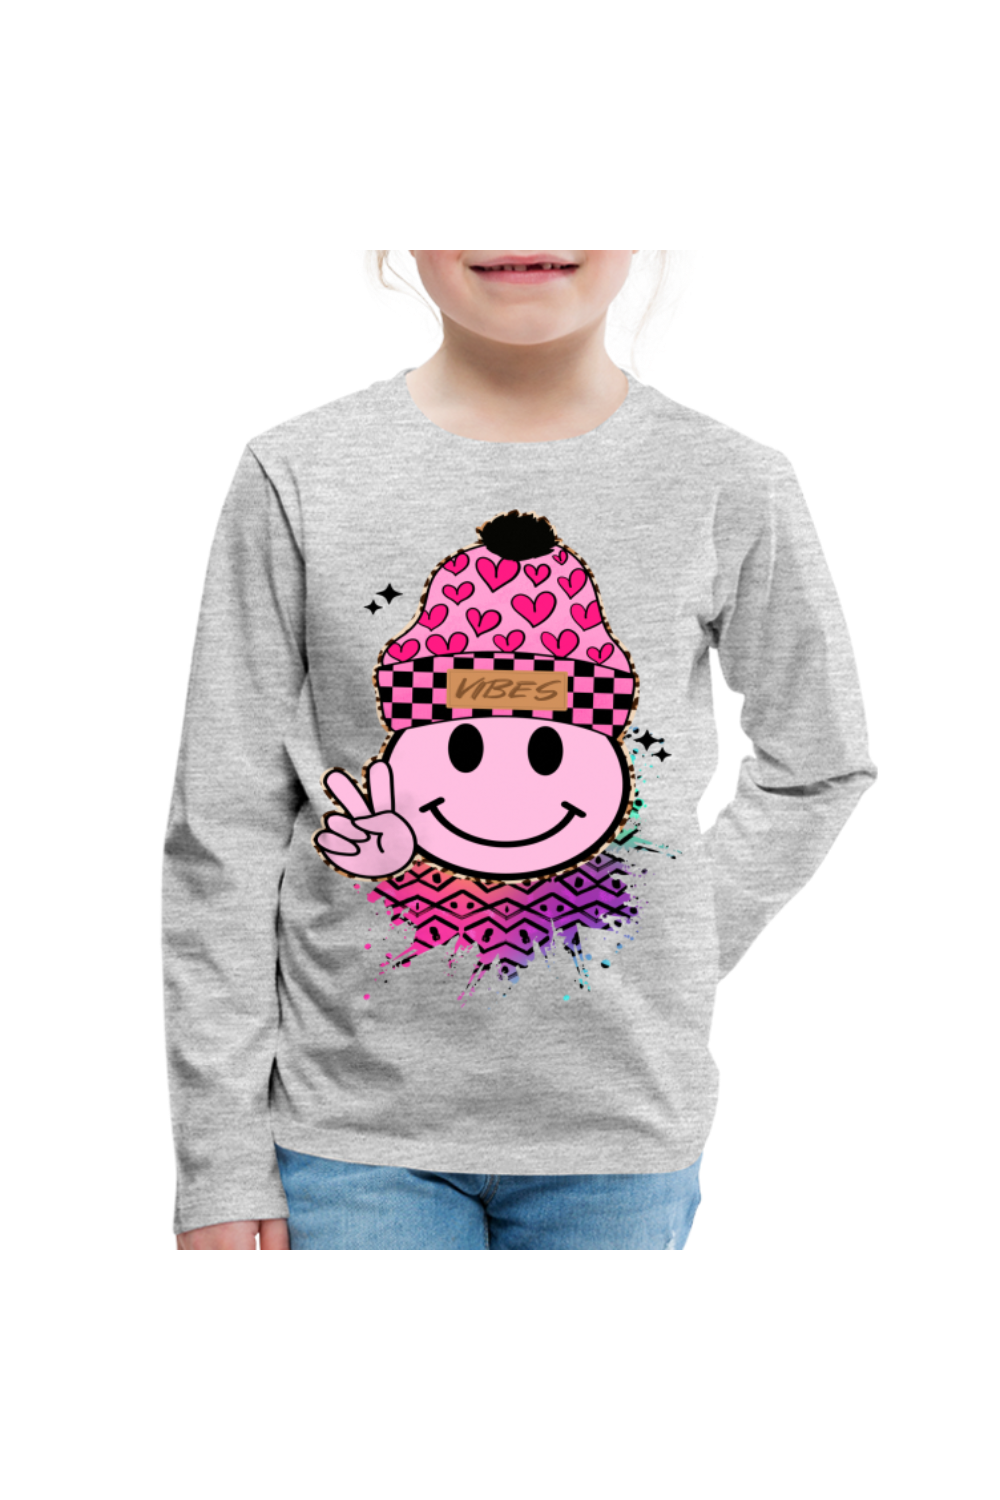 Girls Love Vibes Smiley Face Long Sleeve T-Shirt - heather gray - NicholesGifts.online